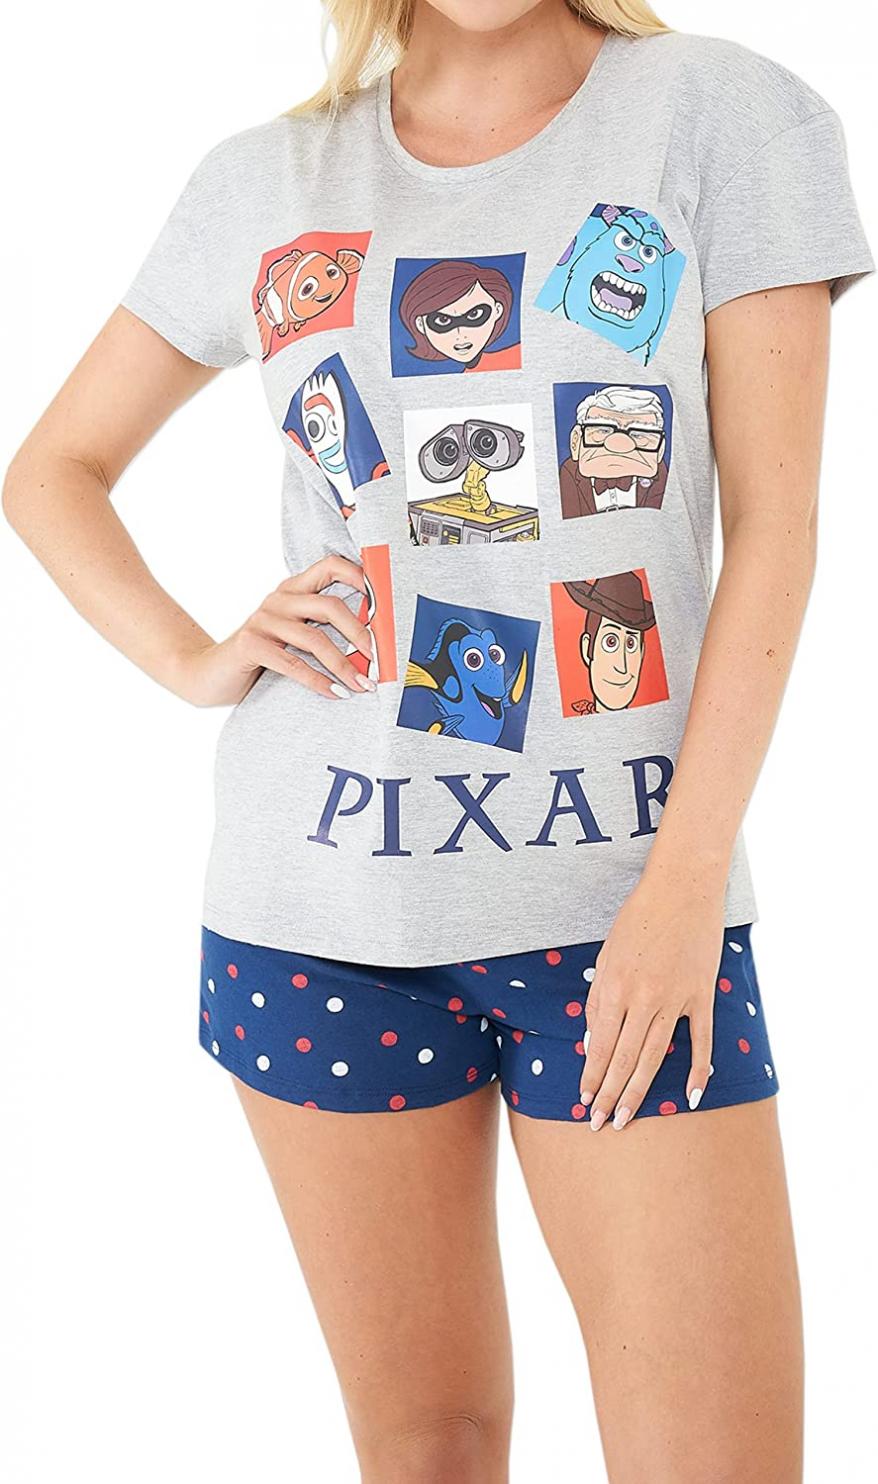 DISNEY Womens Short Pajamas Pixar Toy Story The Incredibles Finding Nemo Monsters Inc